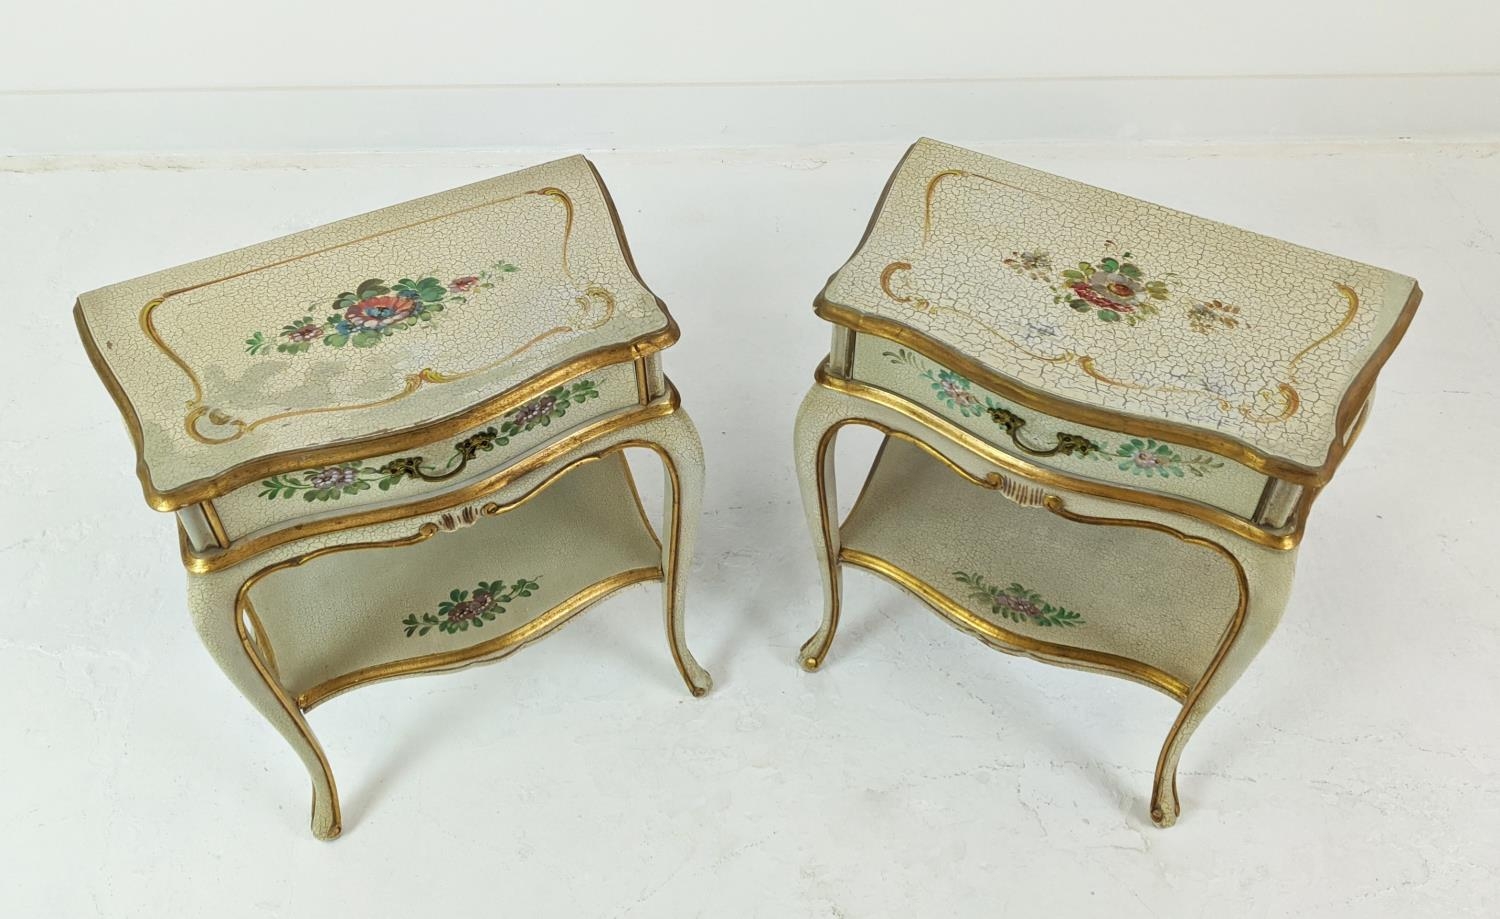 SERPENTINE BEDSIDE TABLES, Italianate craquelure, floral painted and gilt heightened, each with - Image 3 of 7